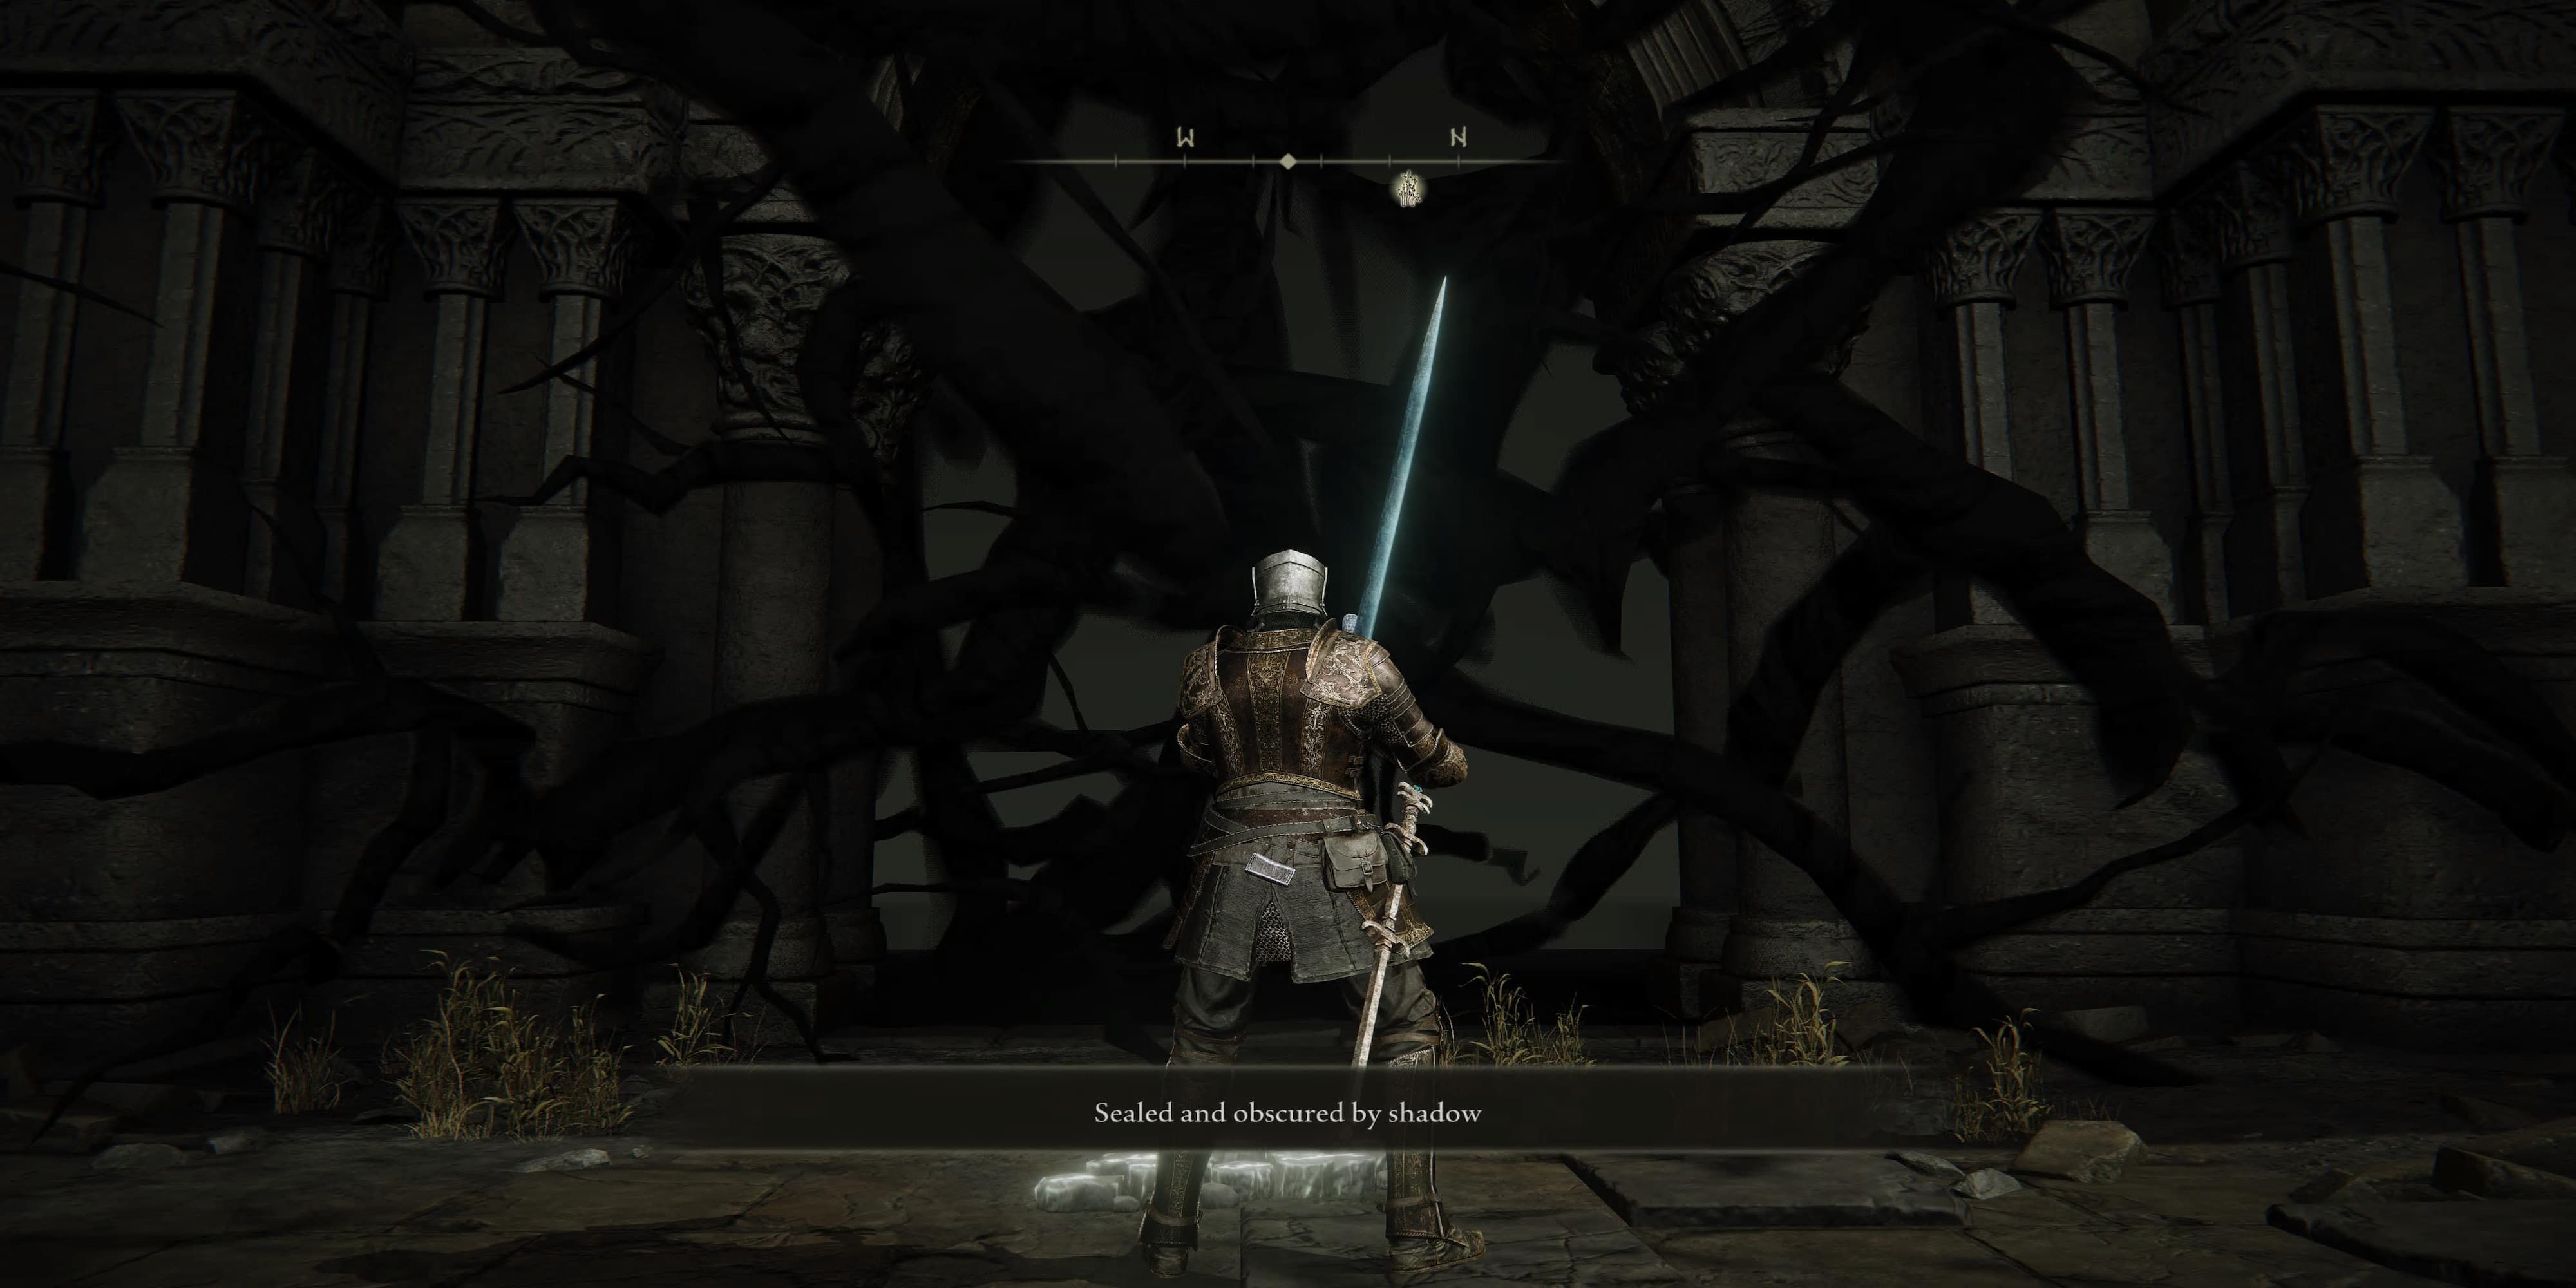 The Player Facing The Shadows